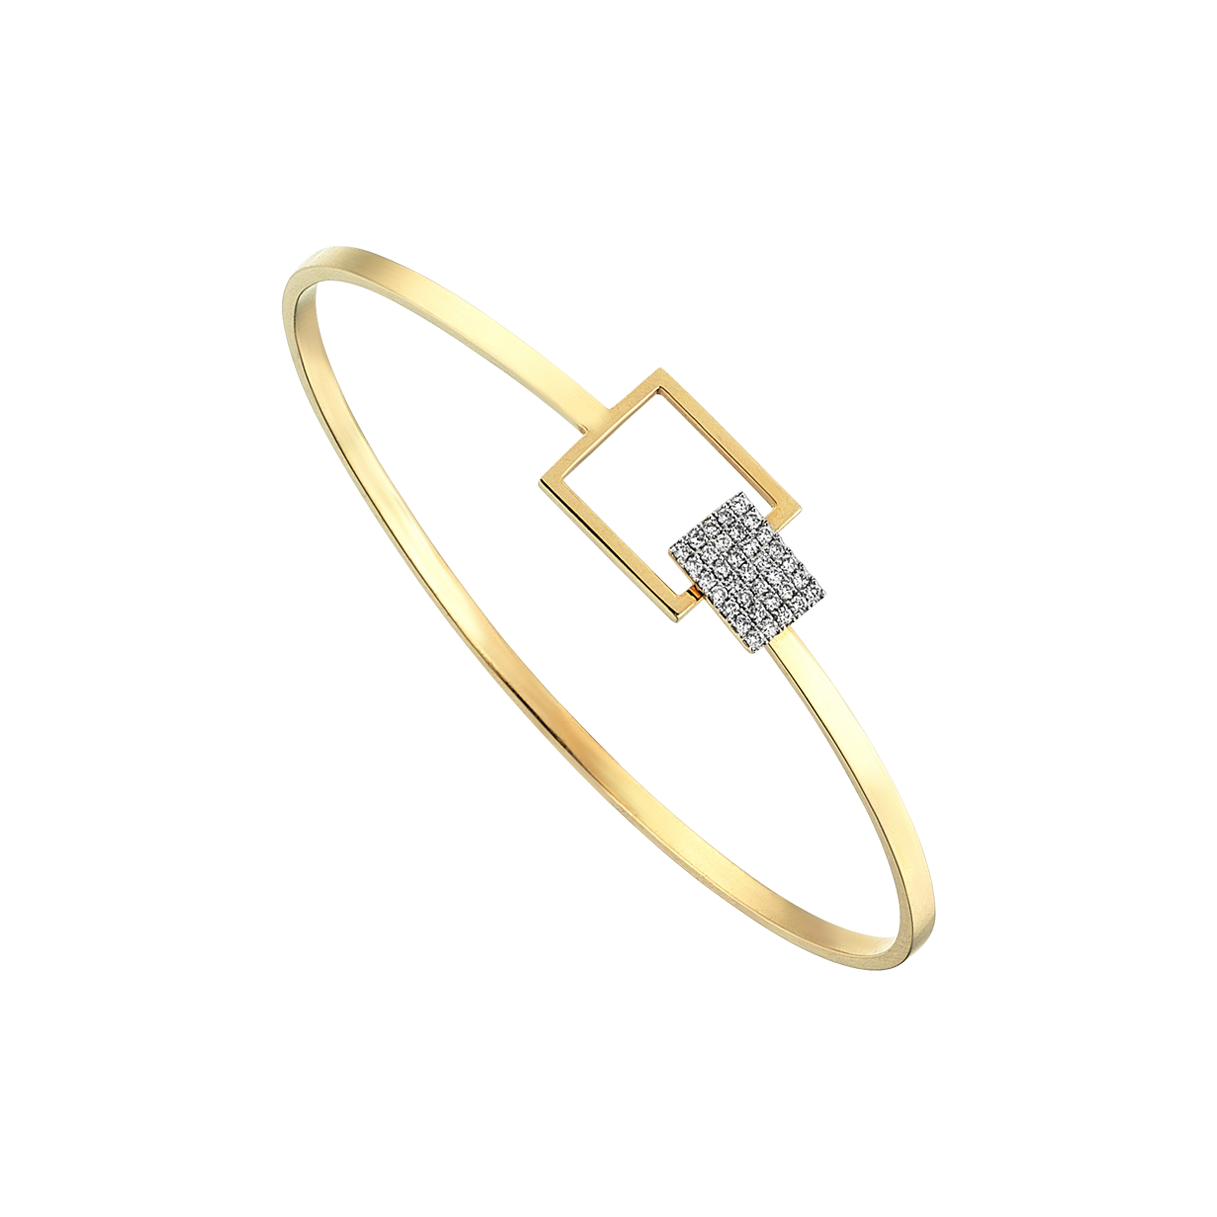 Geometric Squares Pave Bracelet in Yellow Gold - Her Story Shop